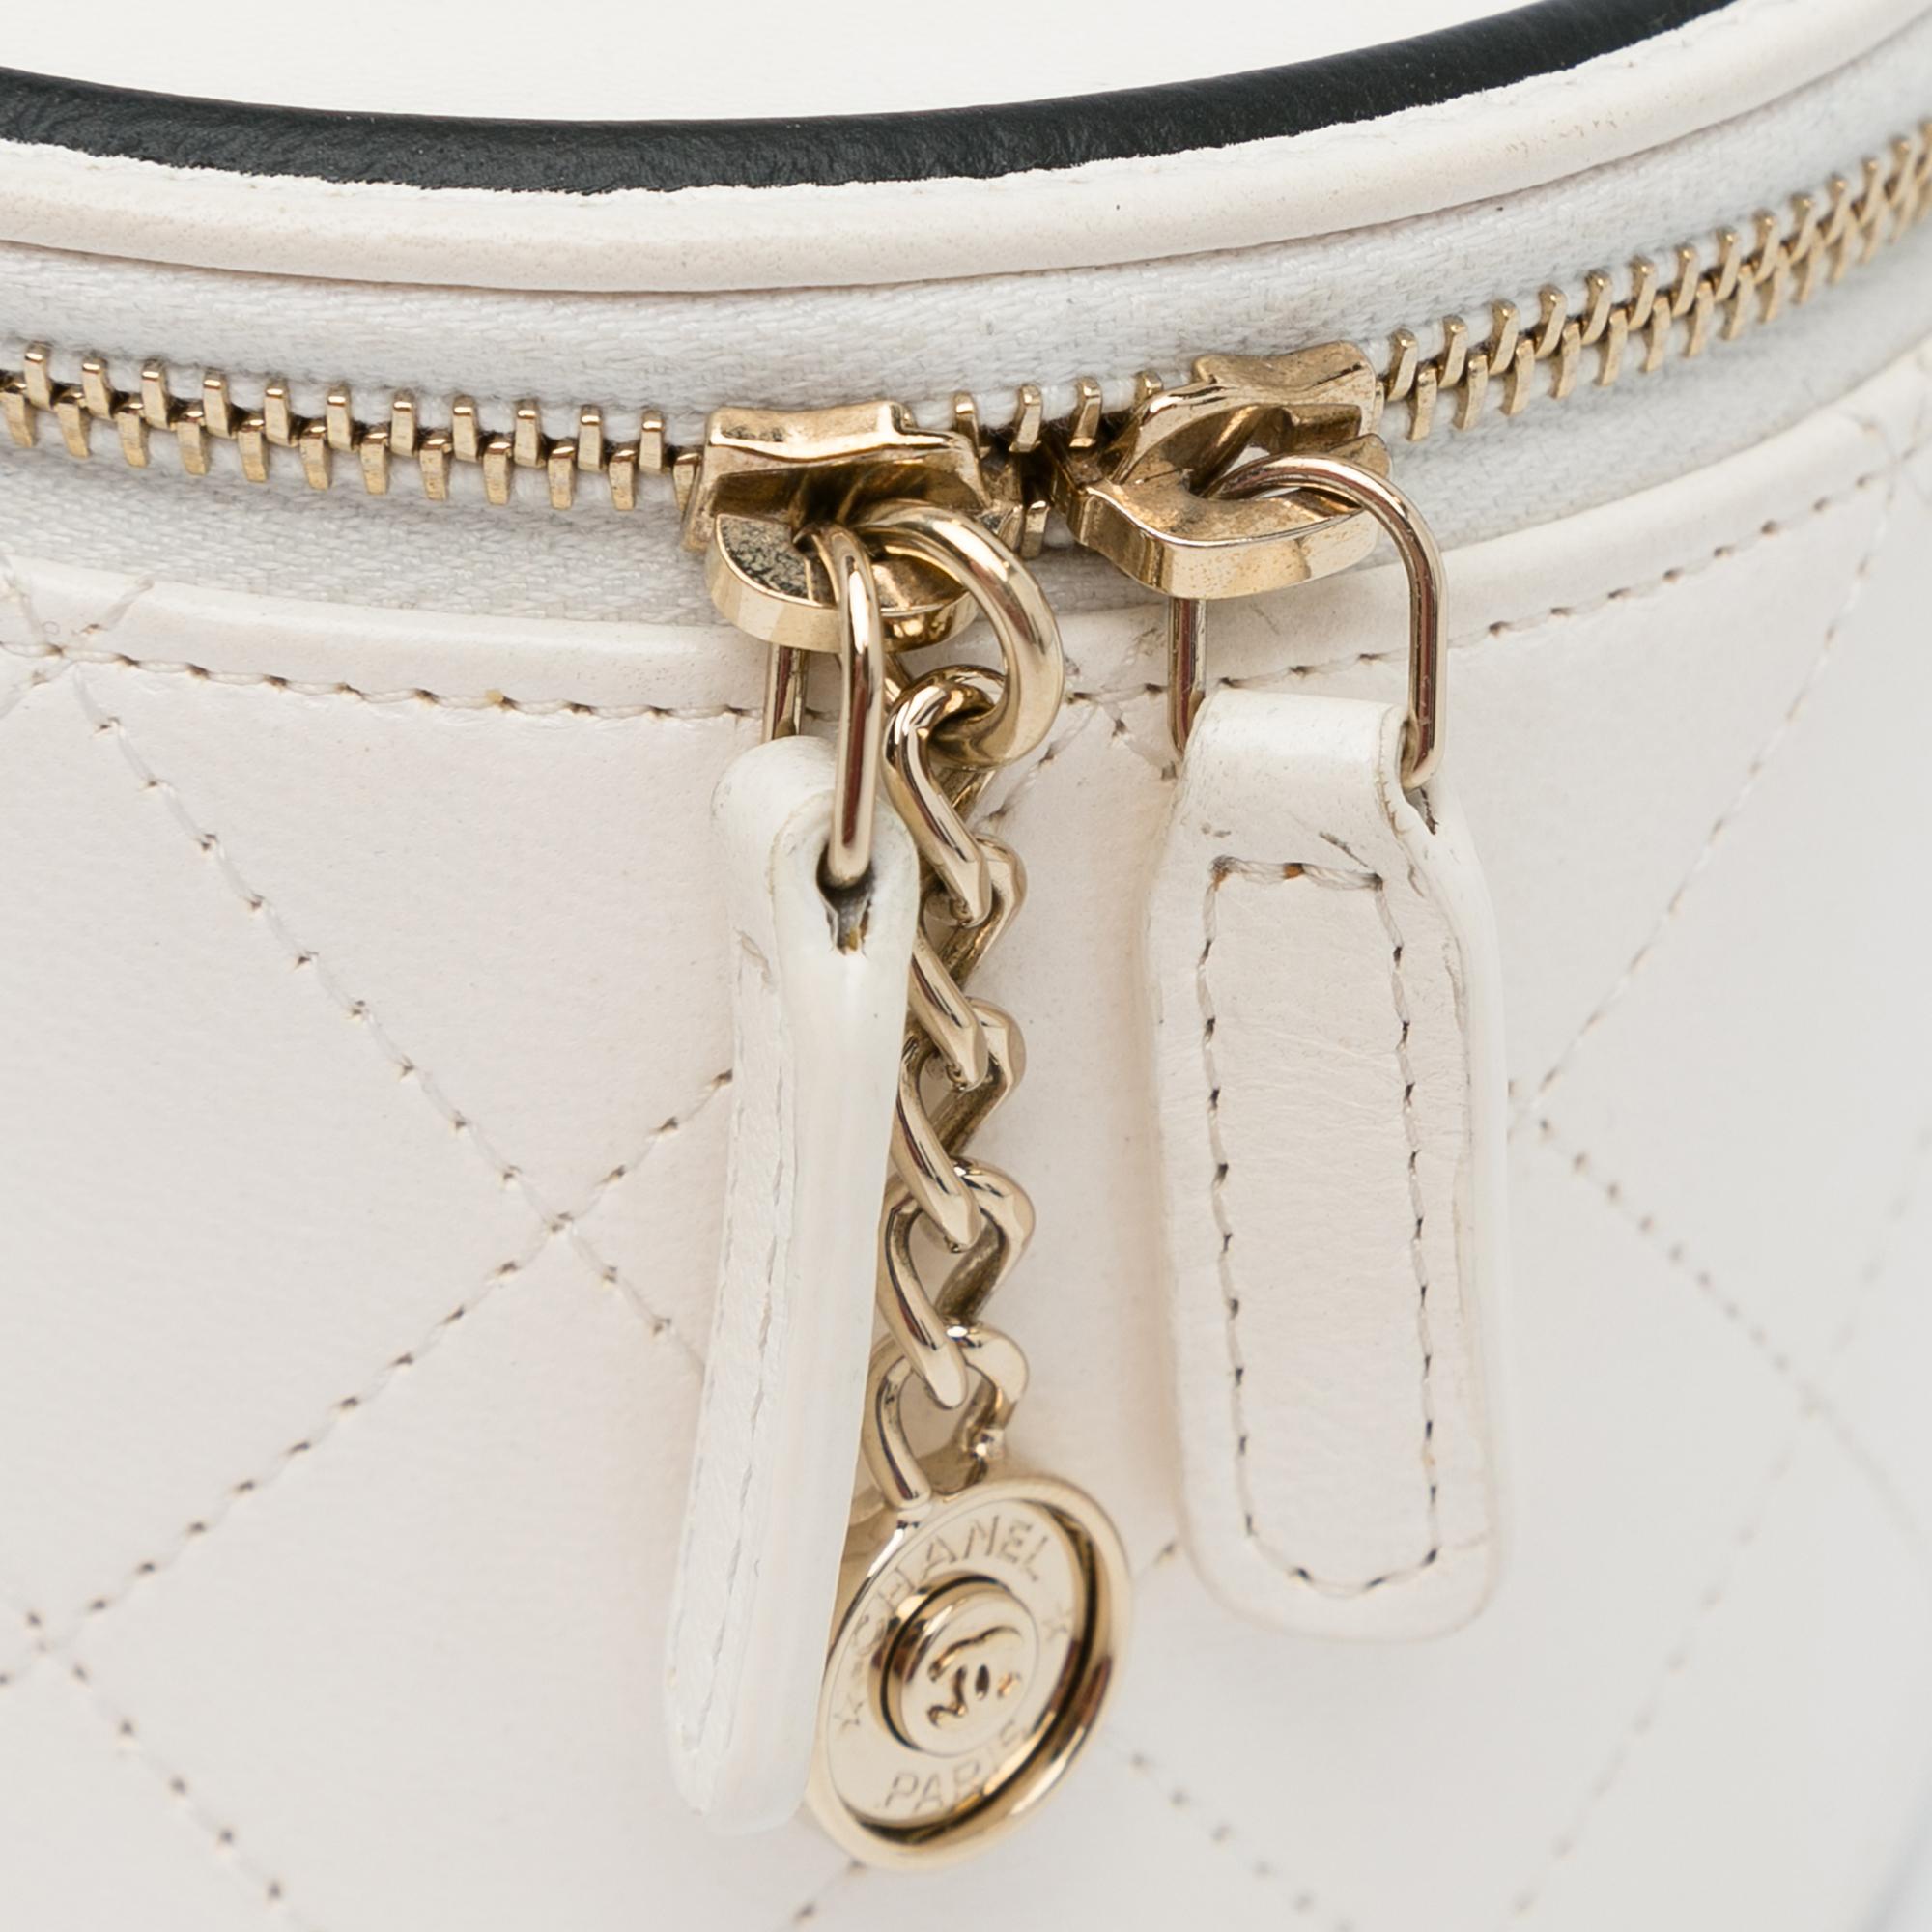 Chanel White Chain And Charm Vanity Case